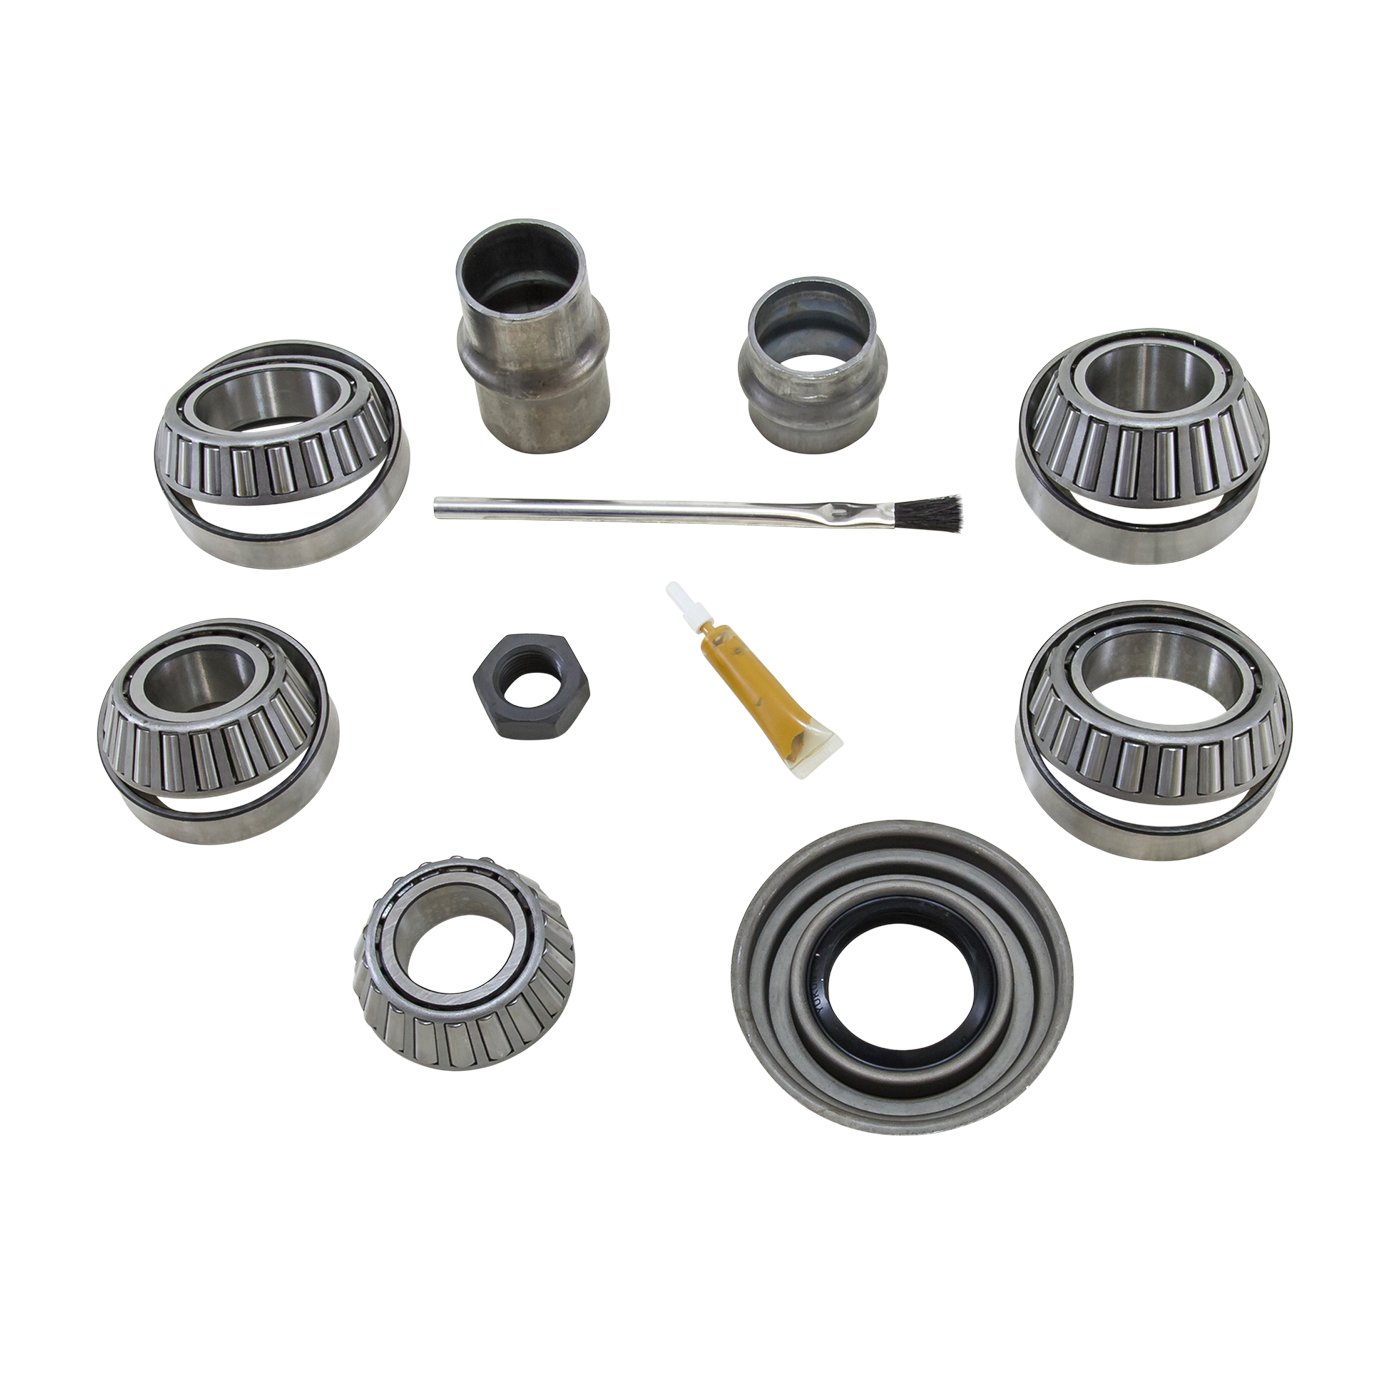 Front/Rear Bearing Installation Kit For Dana 25 Differential Includes: